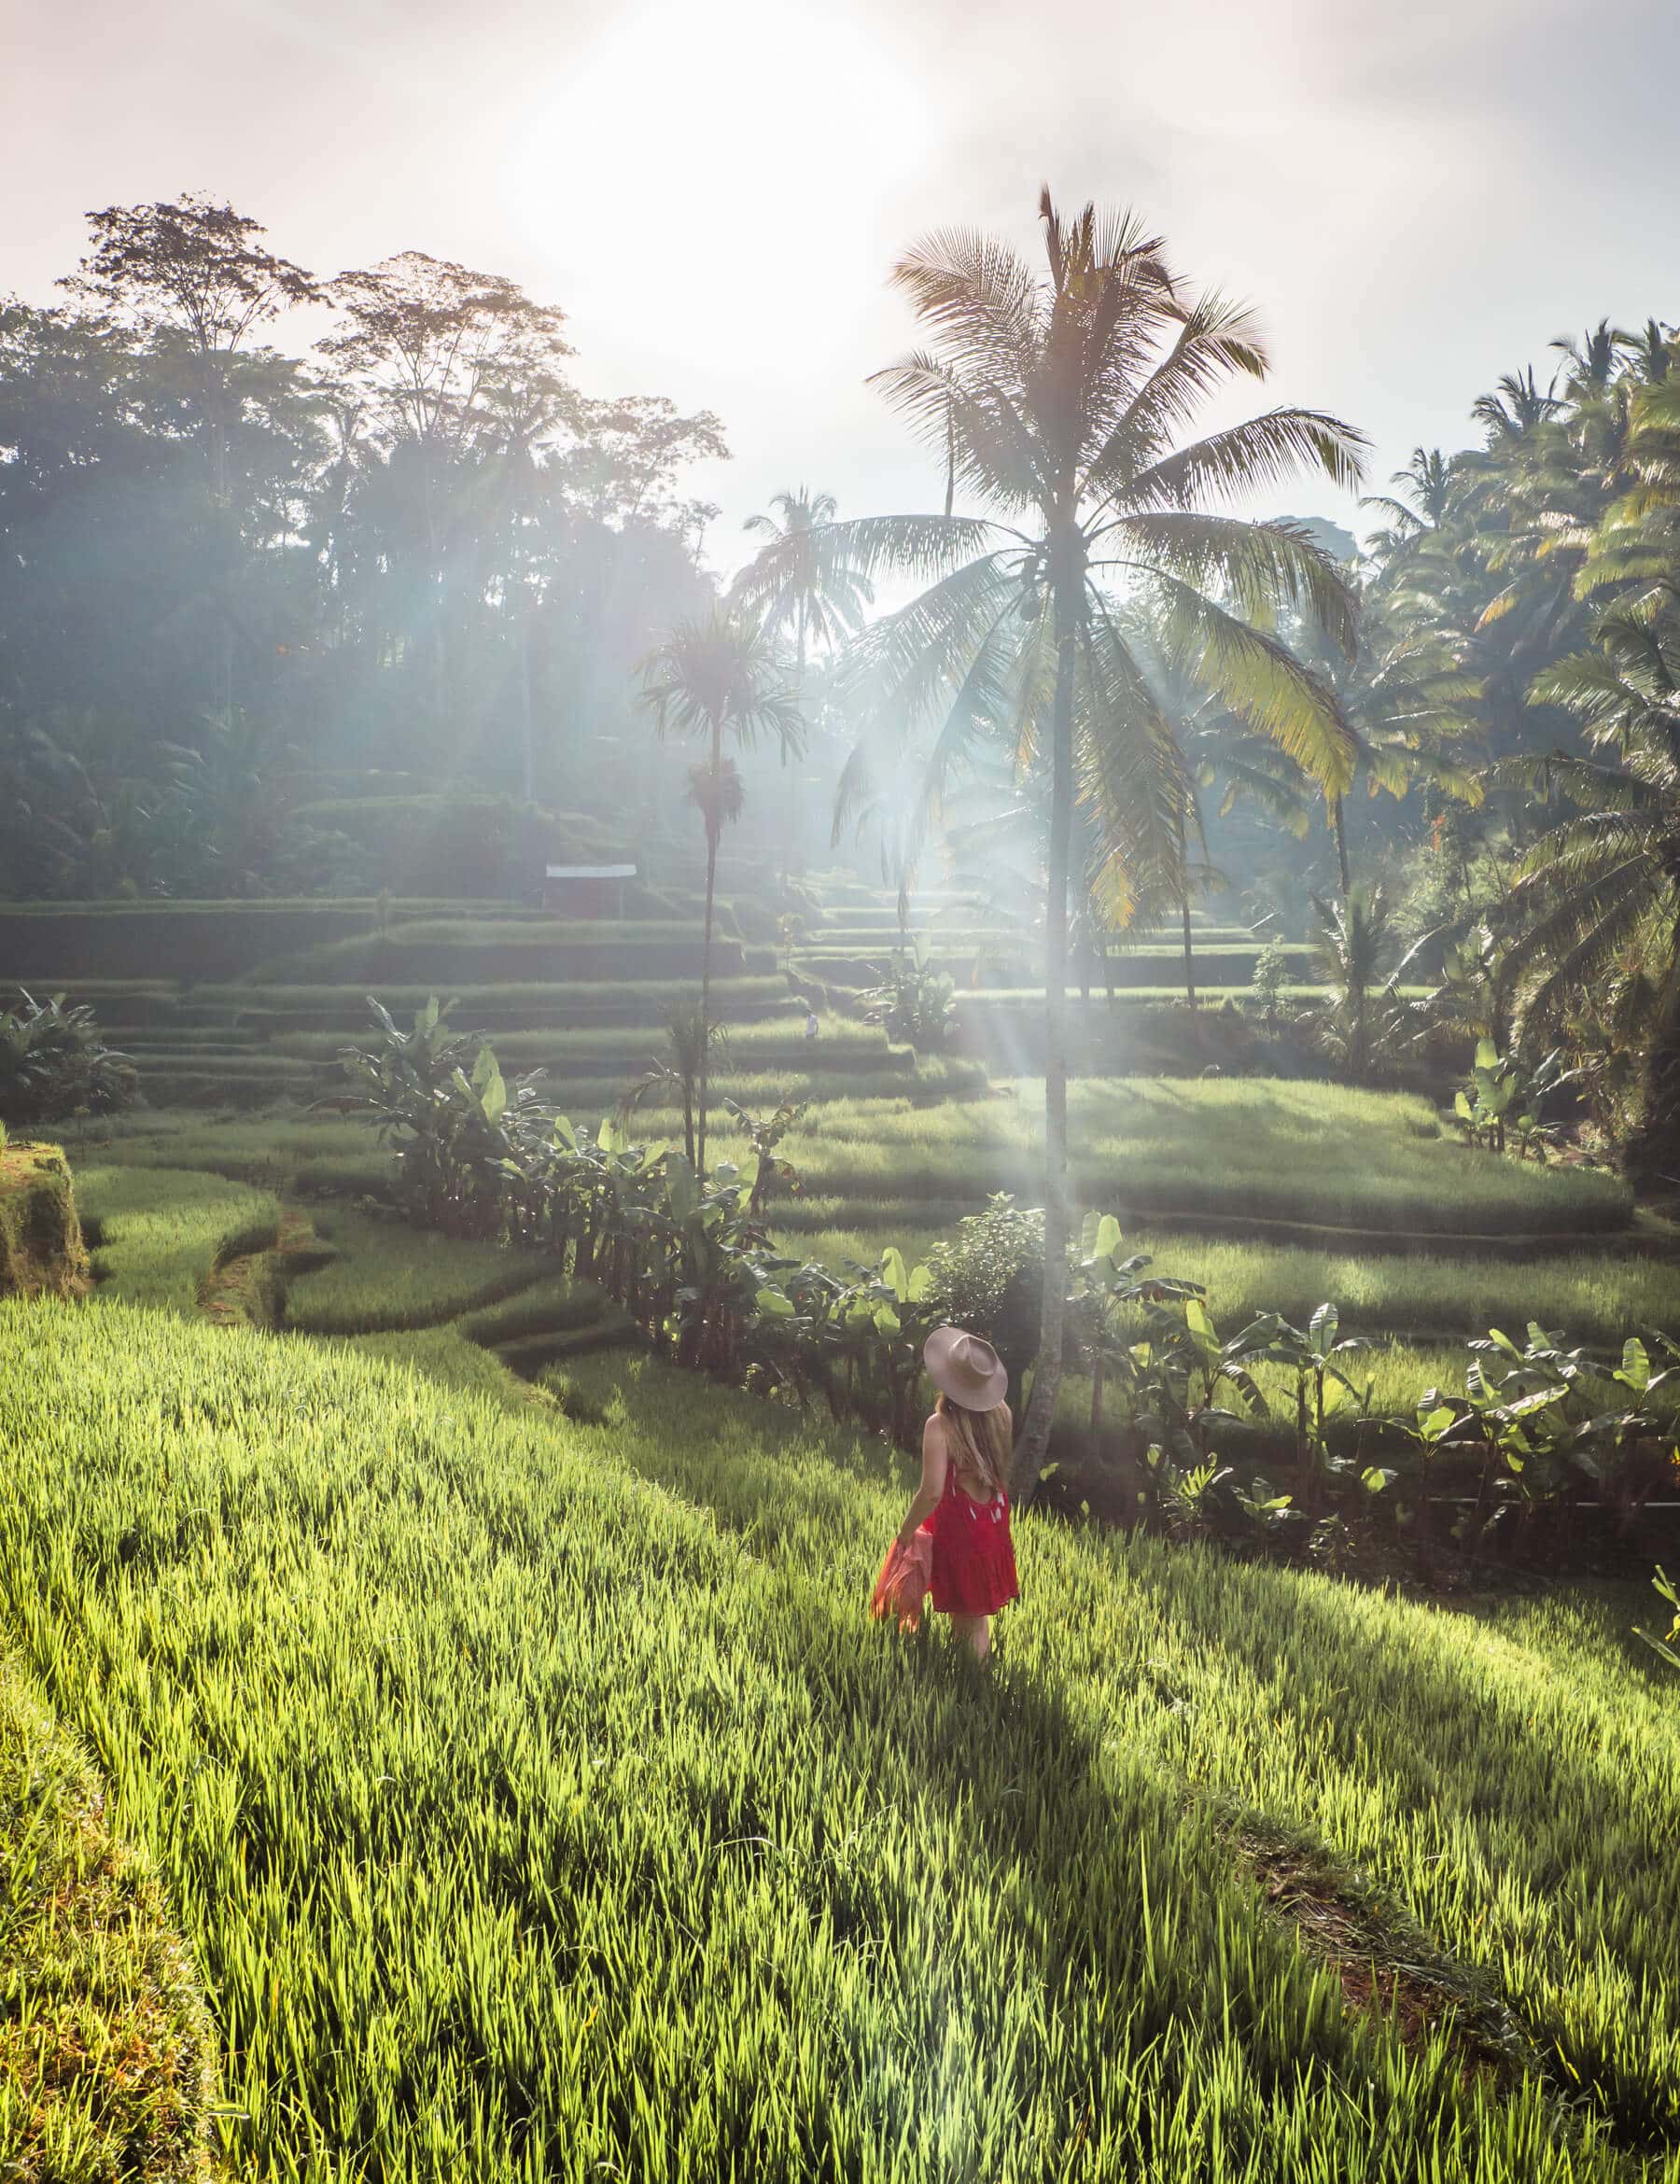 Island Life #4 - Early morning in Tegalalang Rice Terrace in Ubud